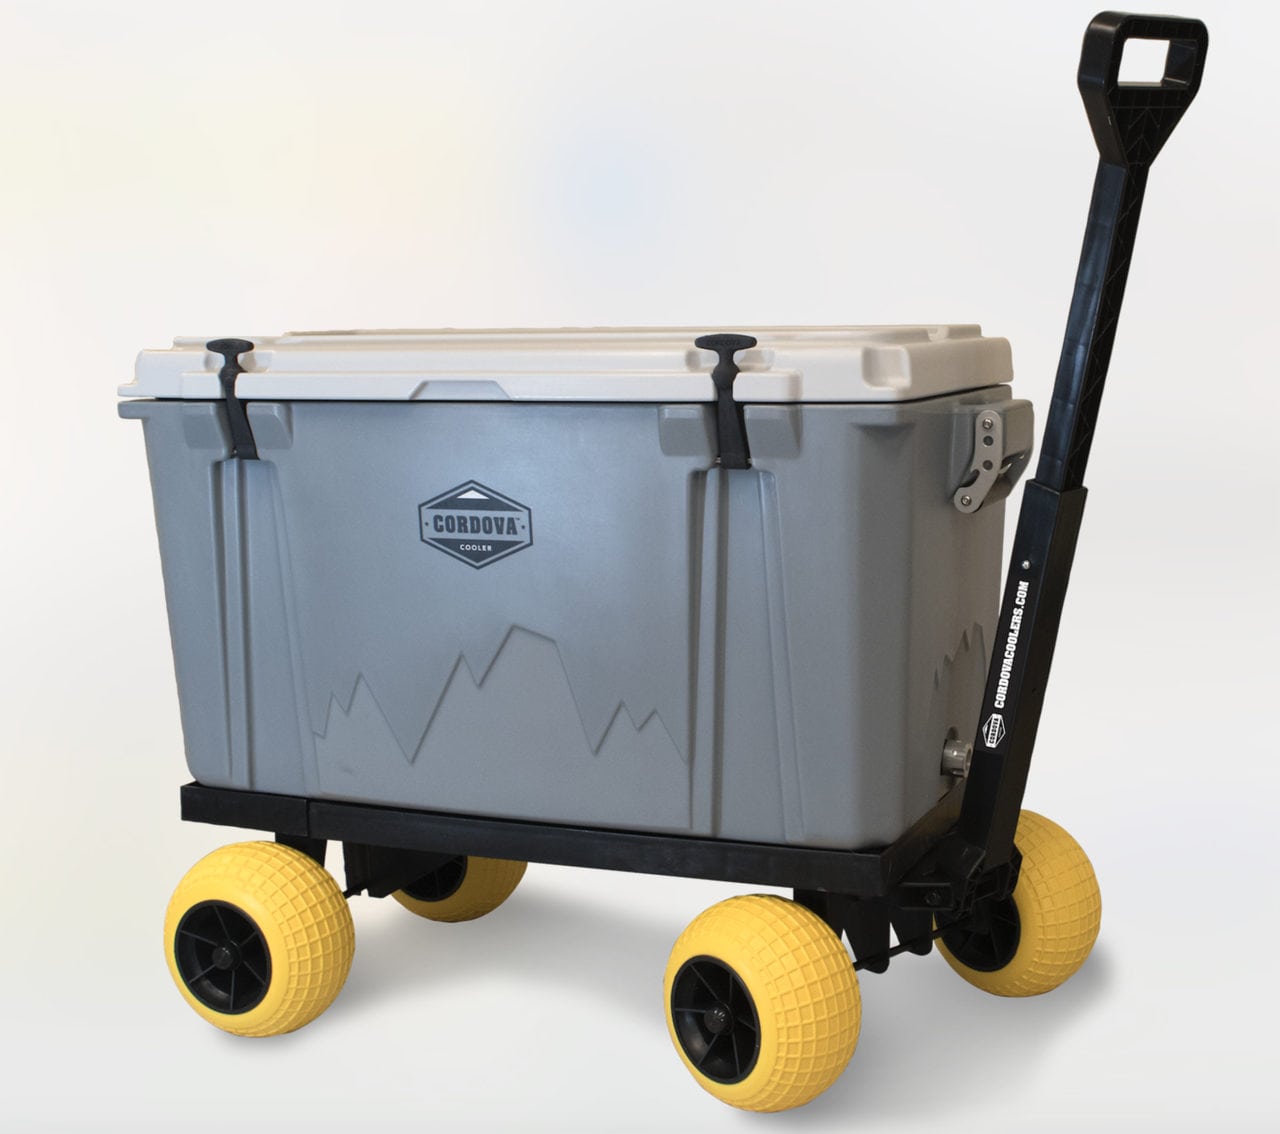 Cordova Cooler Introduces the “Go Anywhere” 35 Small Cooler